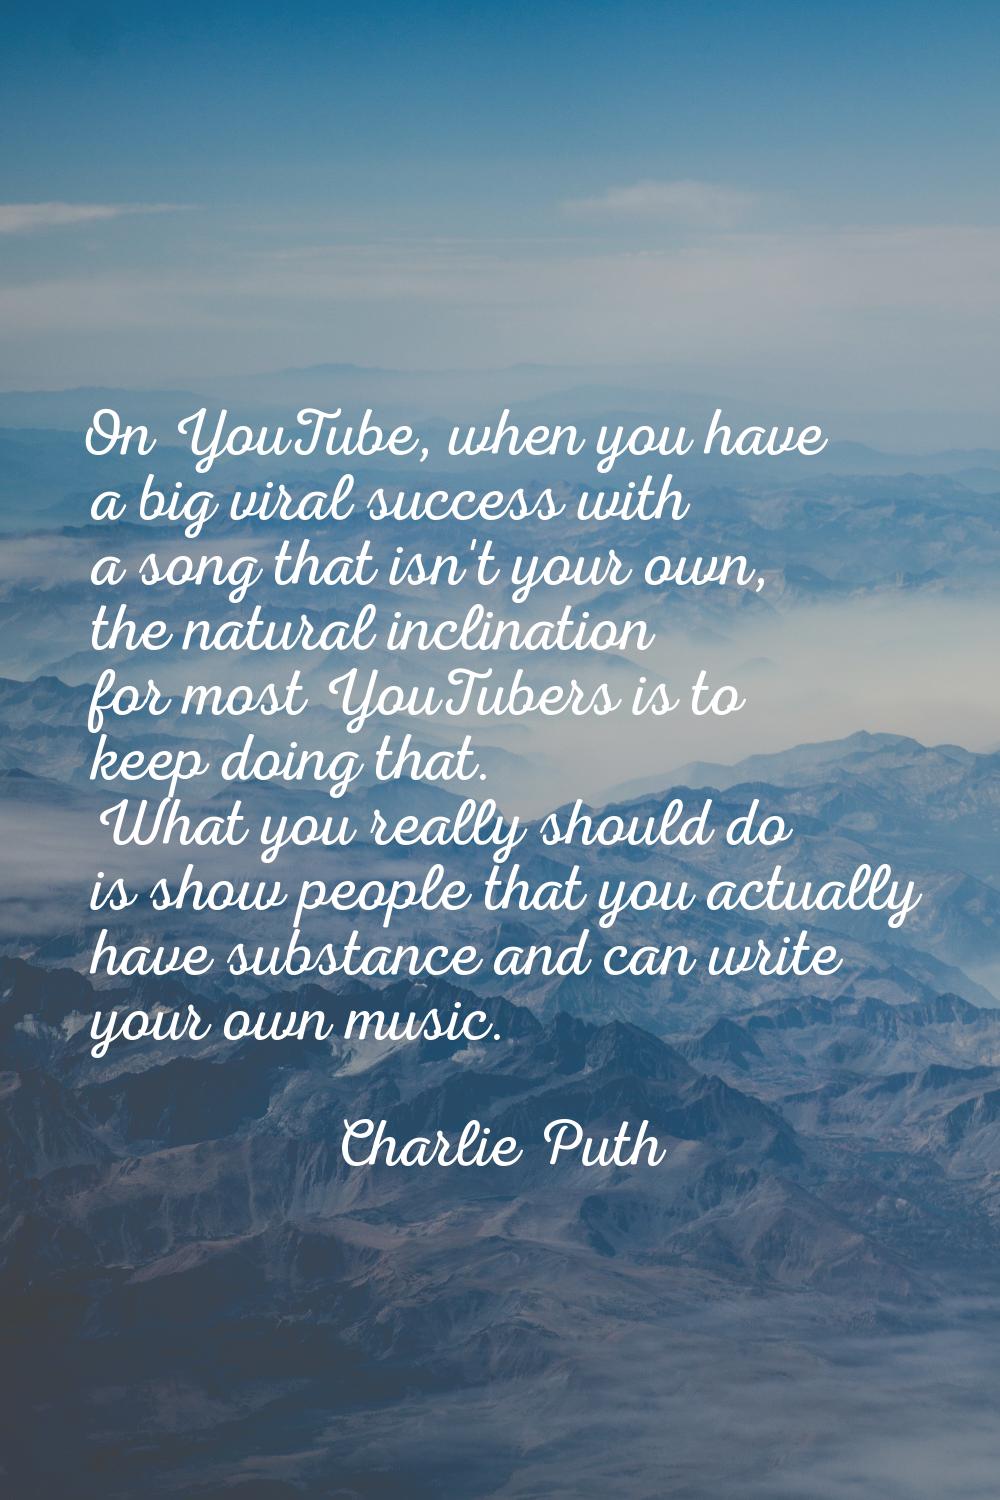 On YouTube, when you have a big viral success with a song that isn't your own, the natural inclinat